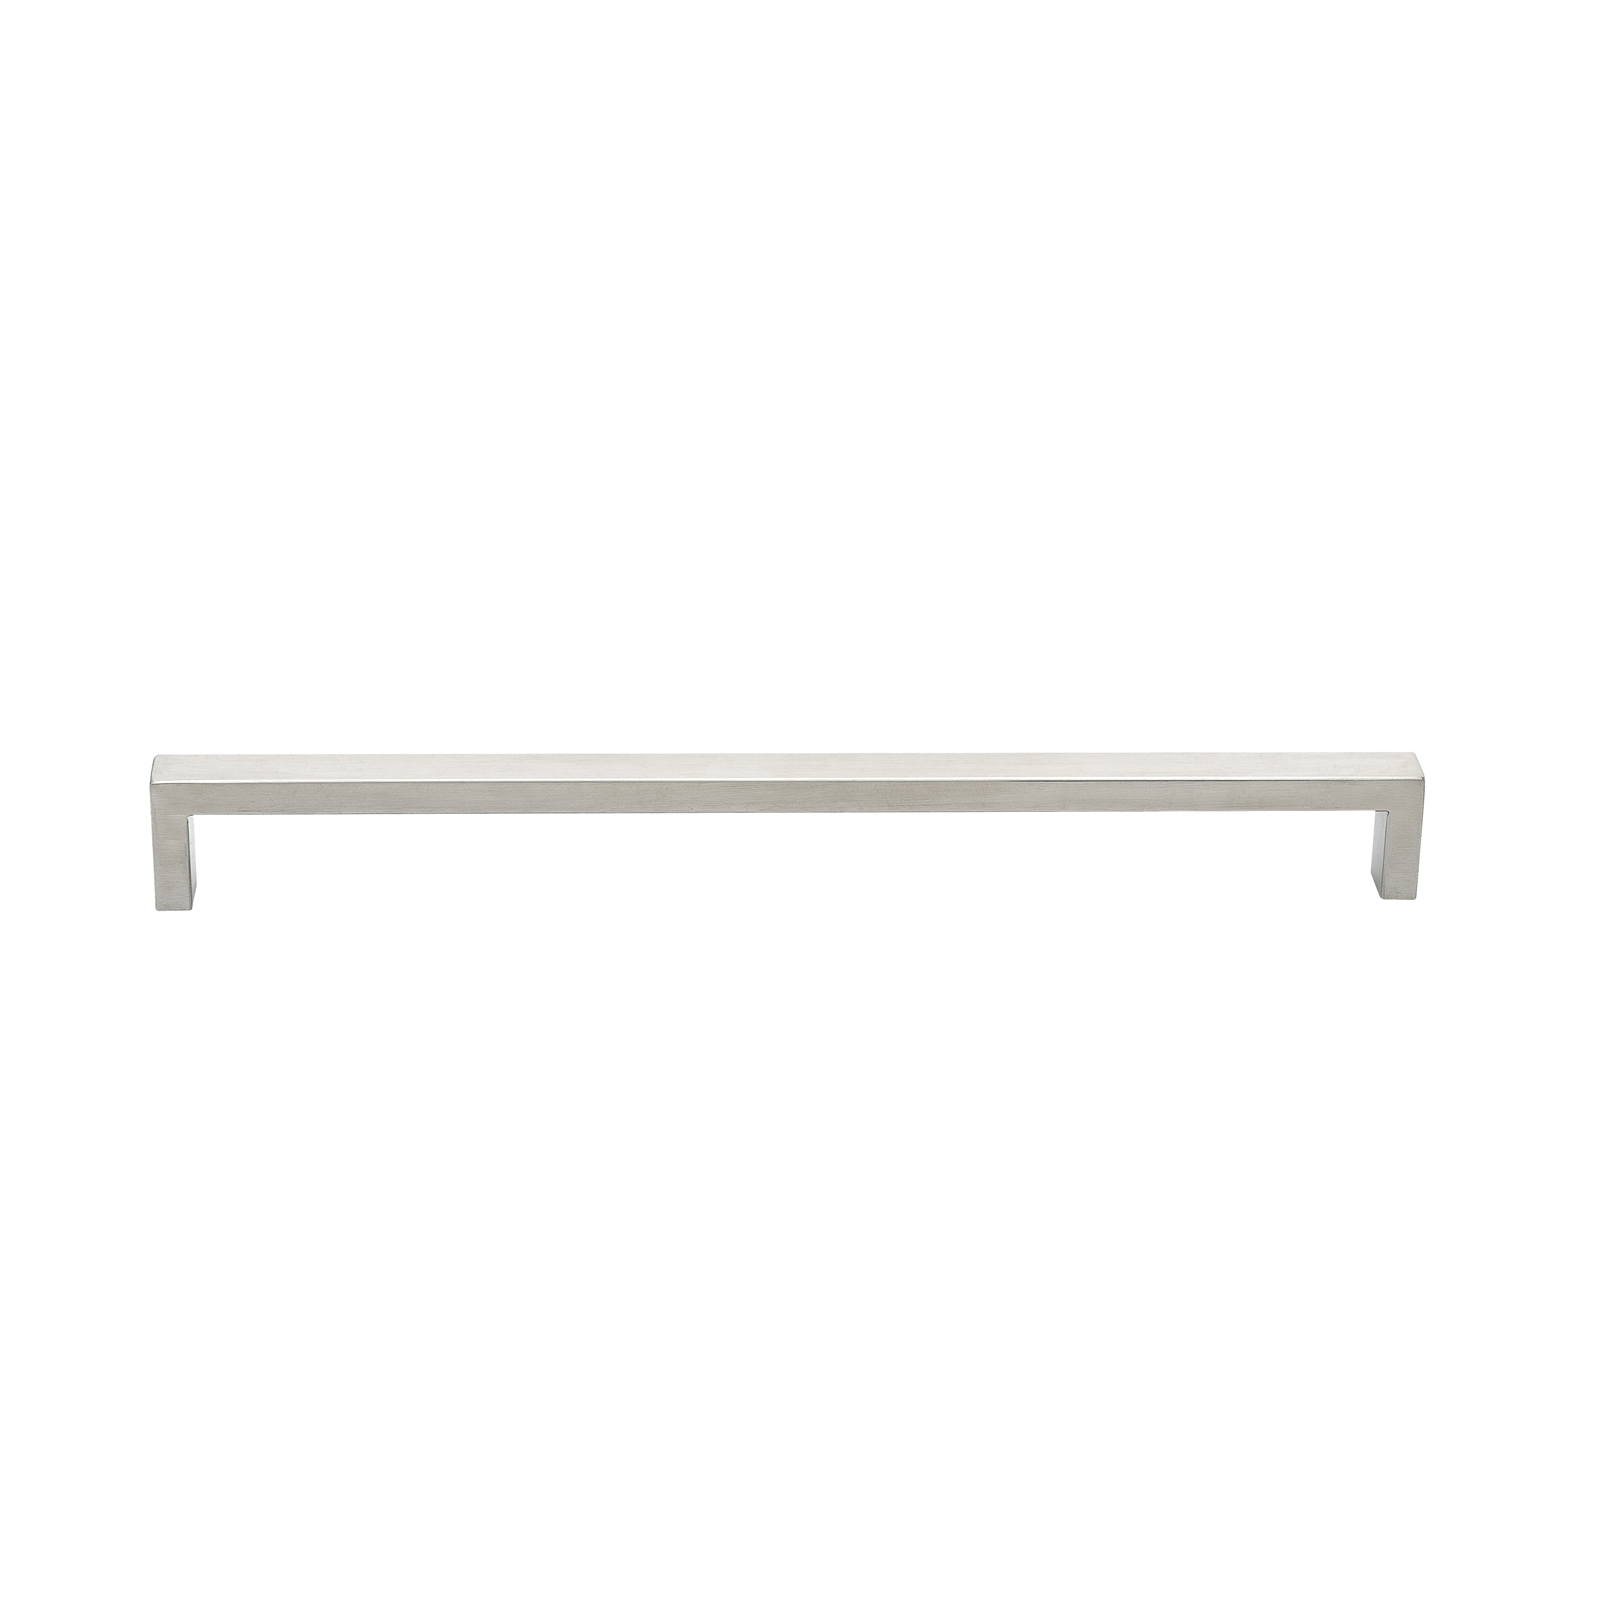 Prestige 320mm Stainless Steel Square Pull Handle